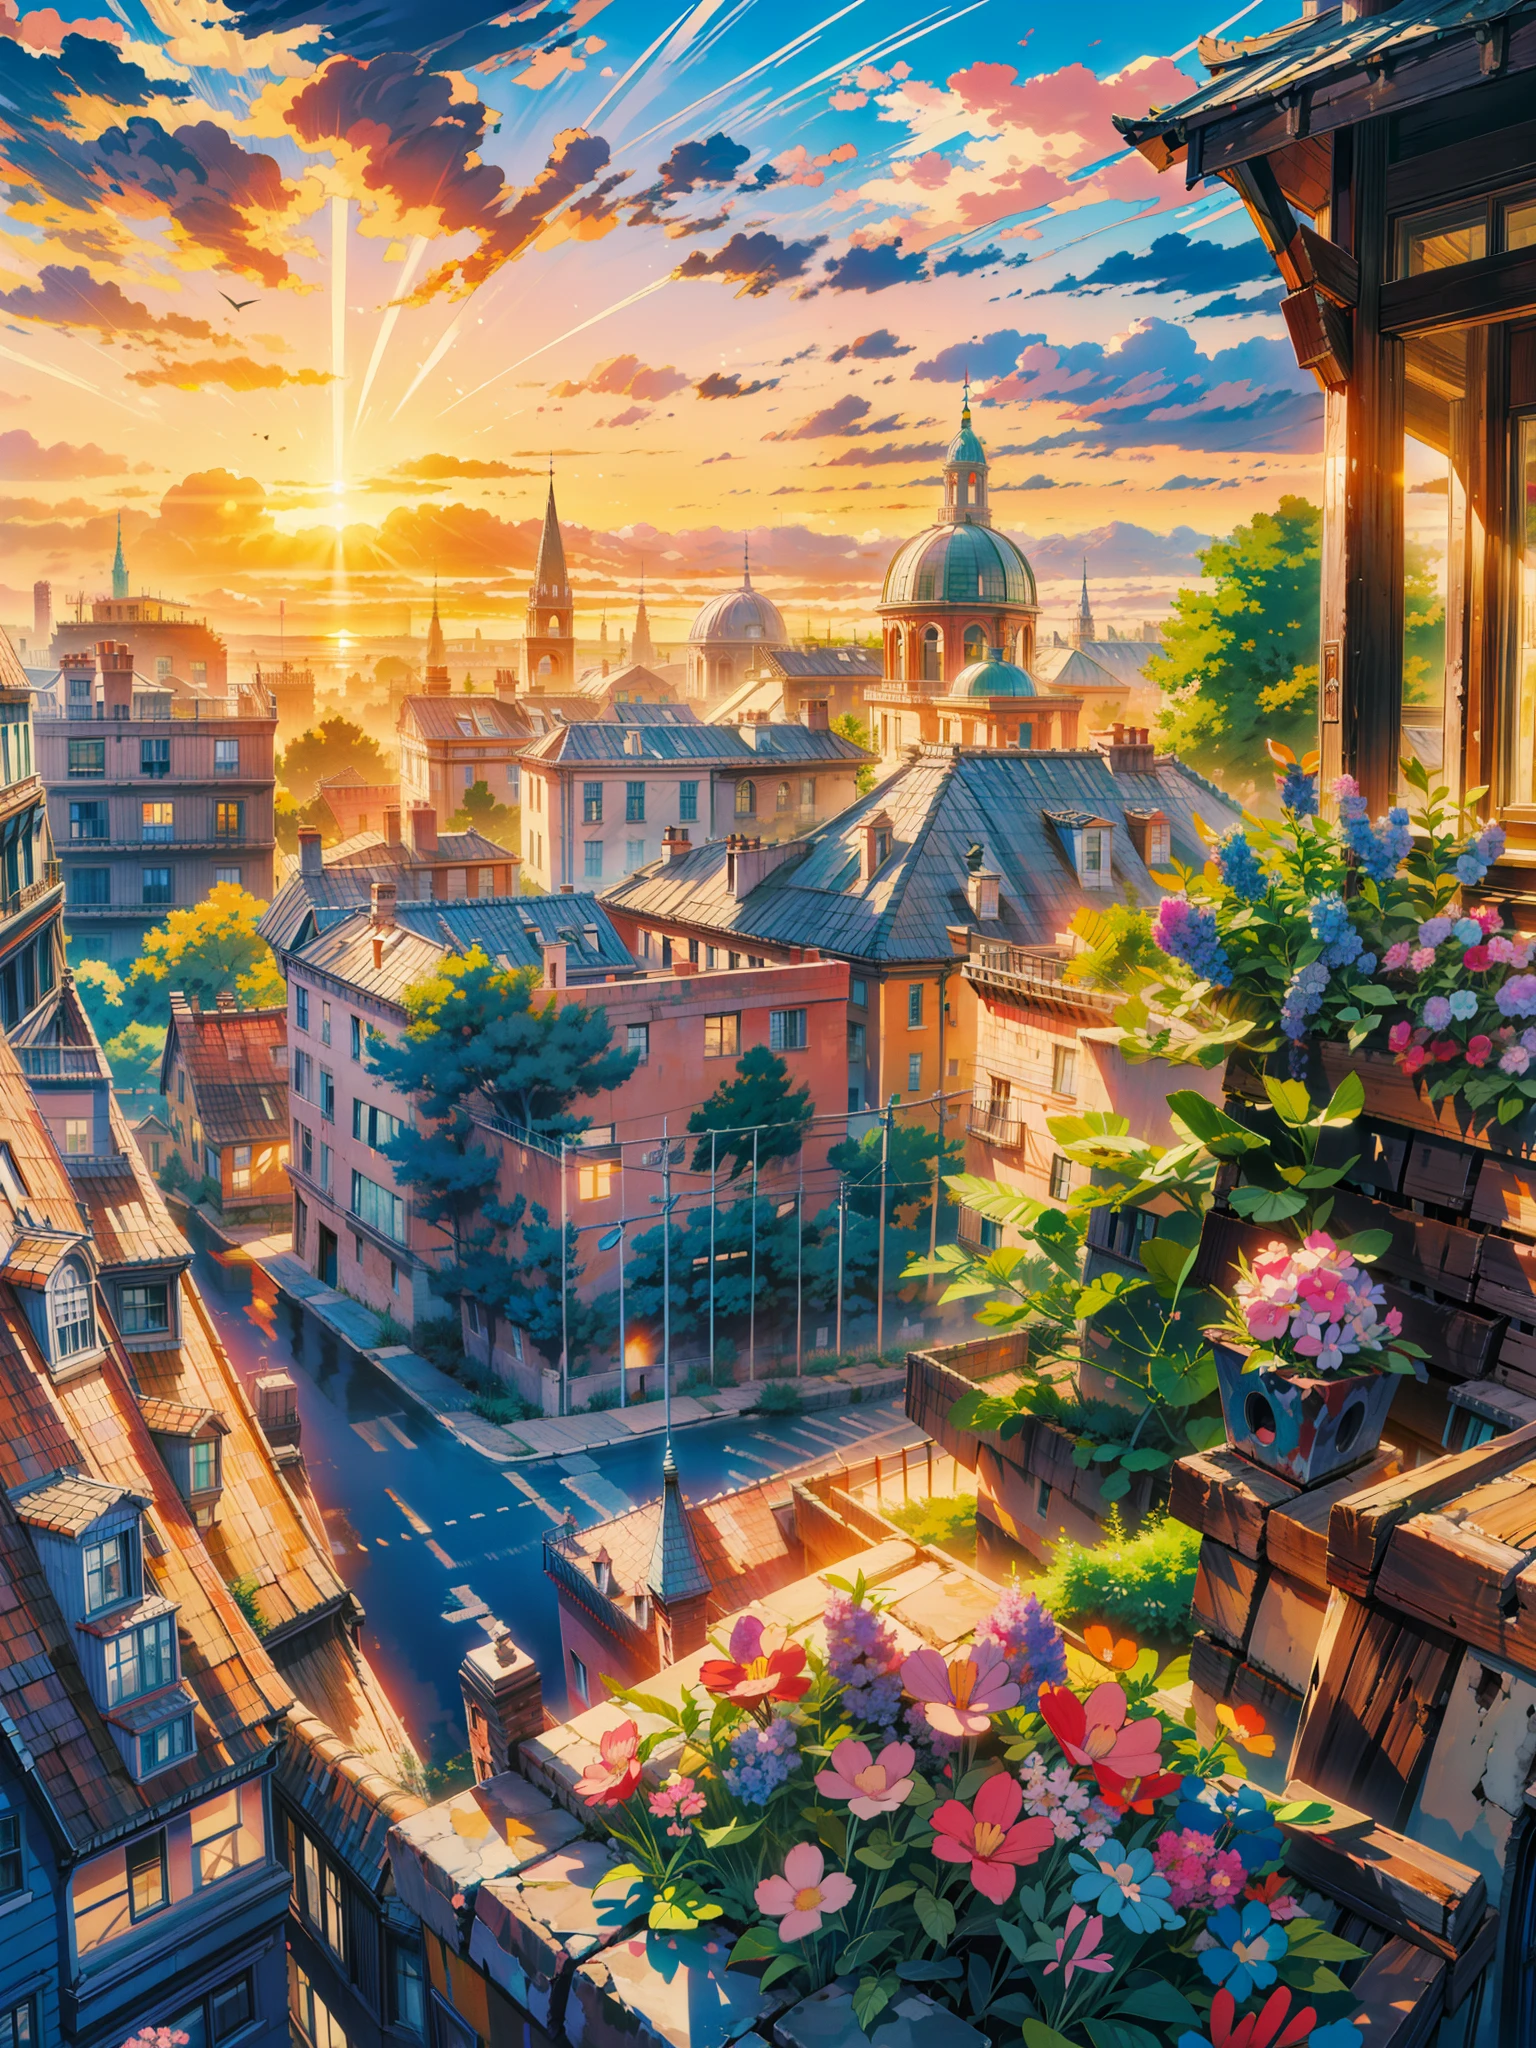 a painting of a sunset over a city, floral sunset, hd anime cityscape, anime scenery, anime landscape, beautiful anime scenery, anime background art, anime scenery concept art, beautiful anime art, tomas kinkade, watching the sun set. anime, beautiful anime artwork, background of flowery hill, beautiful terrace, anime style cityscape, anime beautiful peace scene, no people